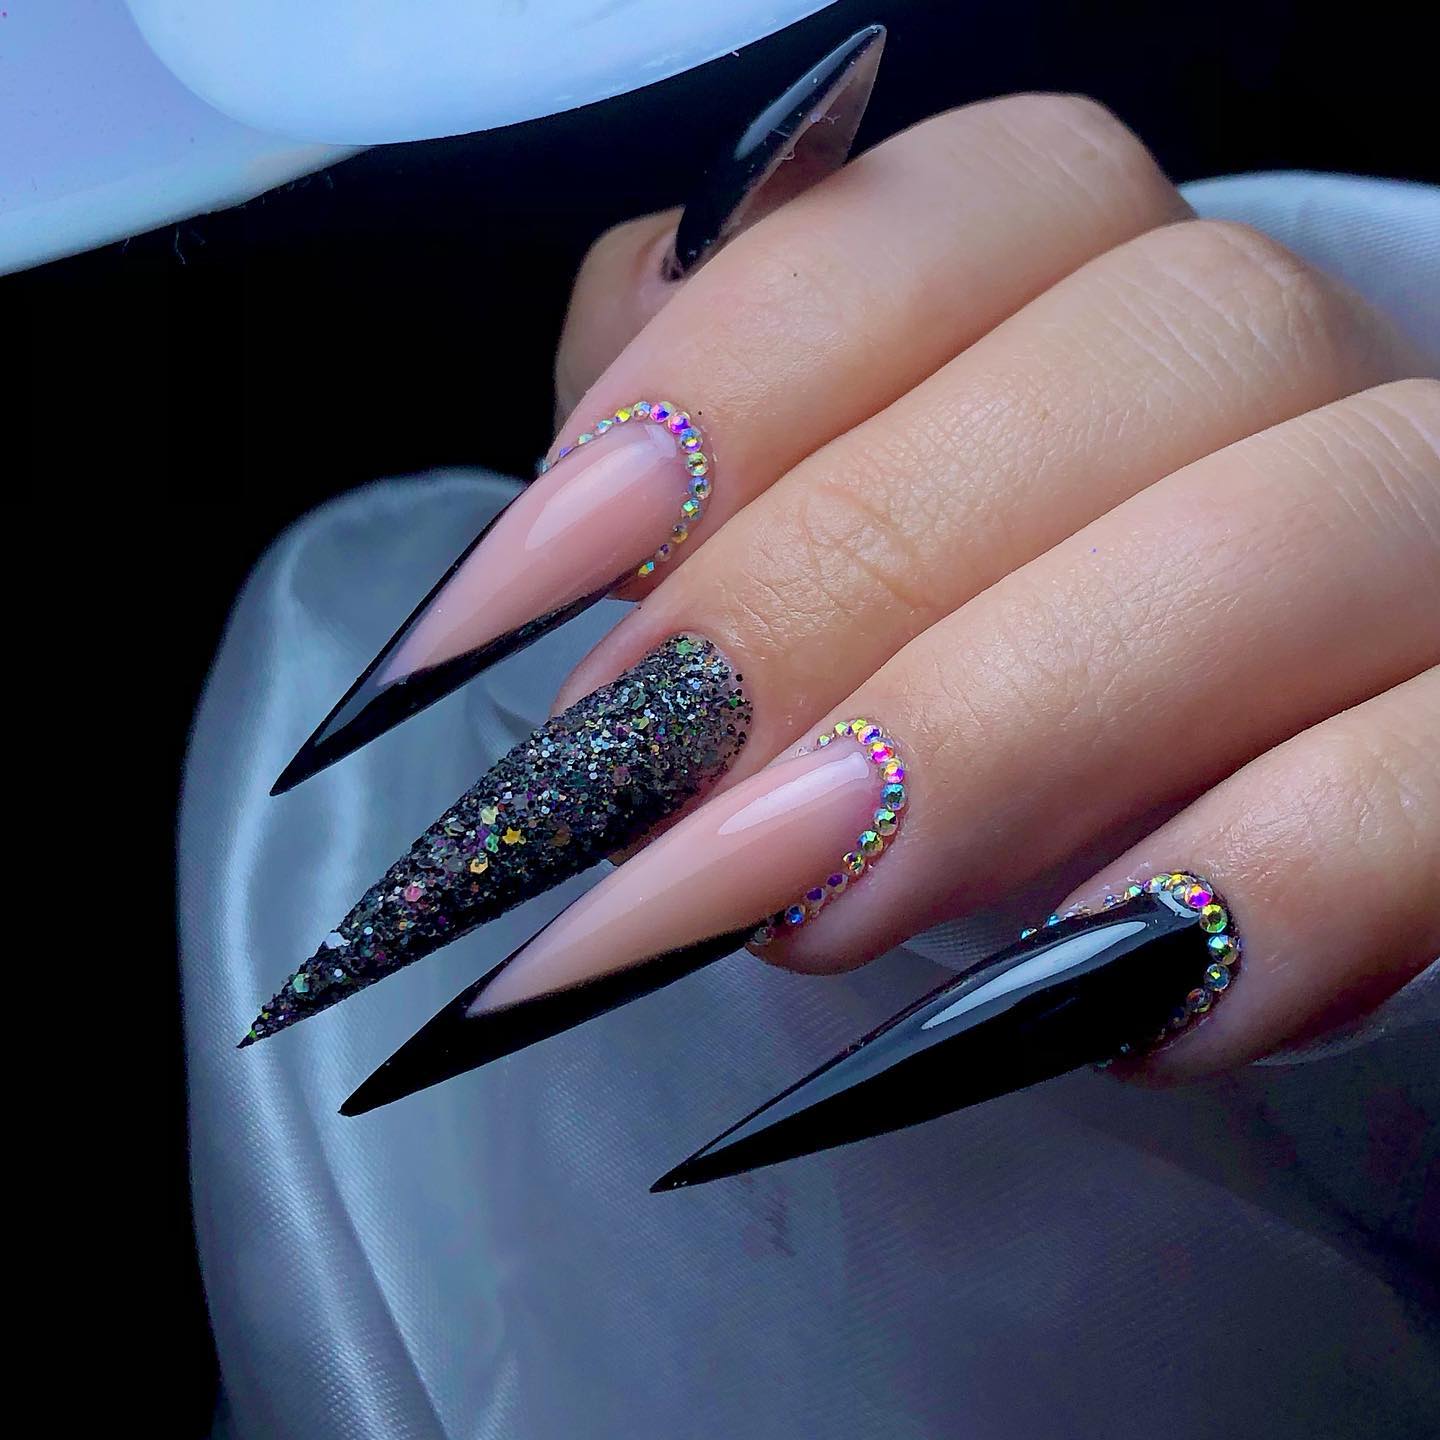 Discover 135+ pictures of stiletto nails - songngunhatanh.edu.vn